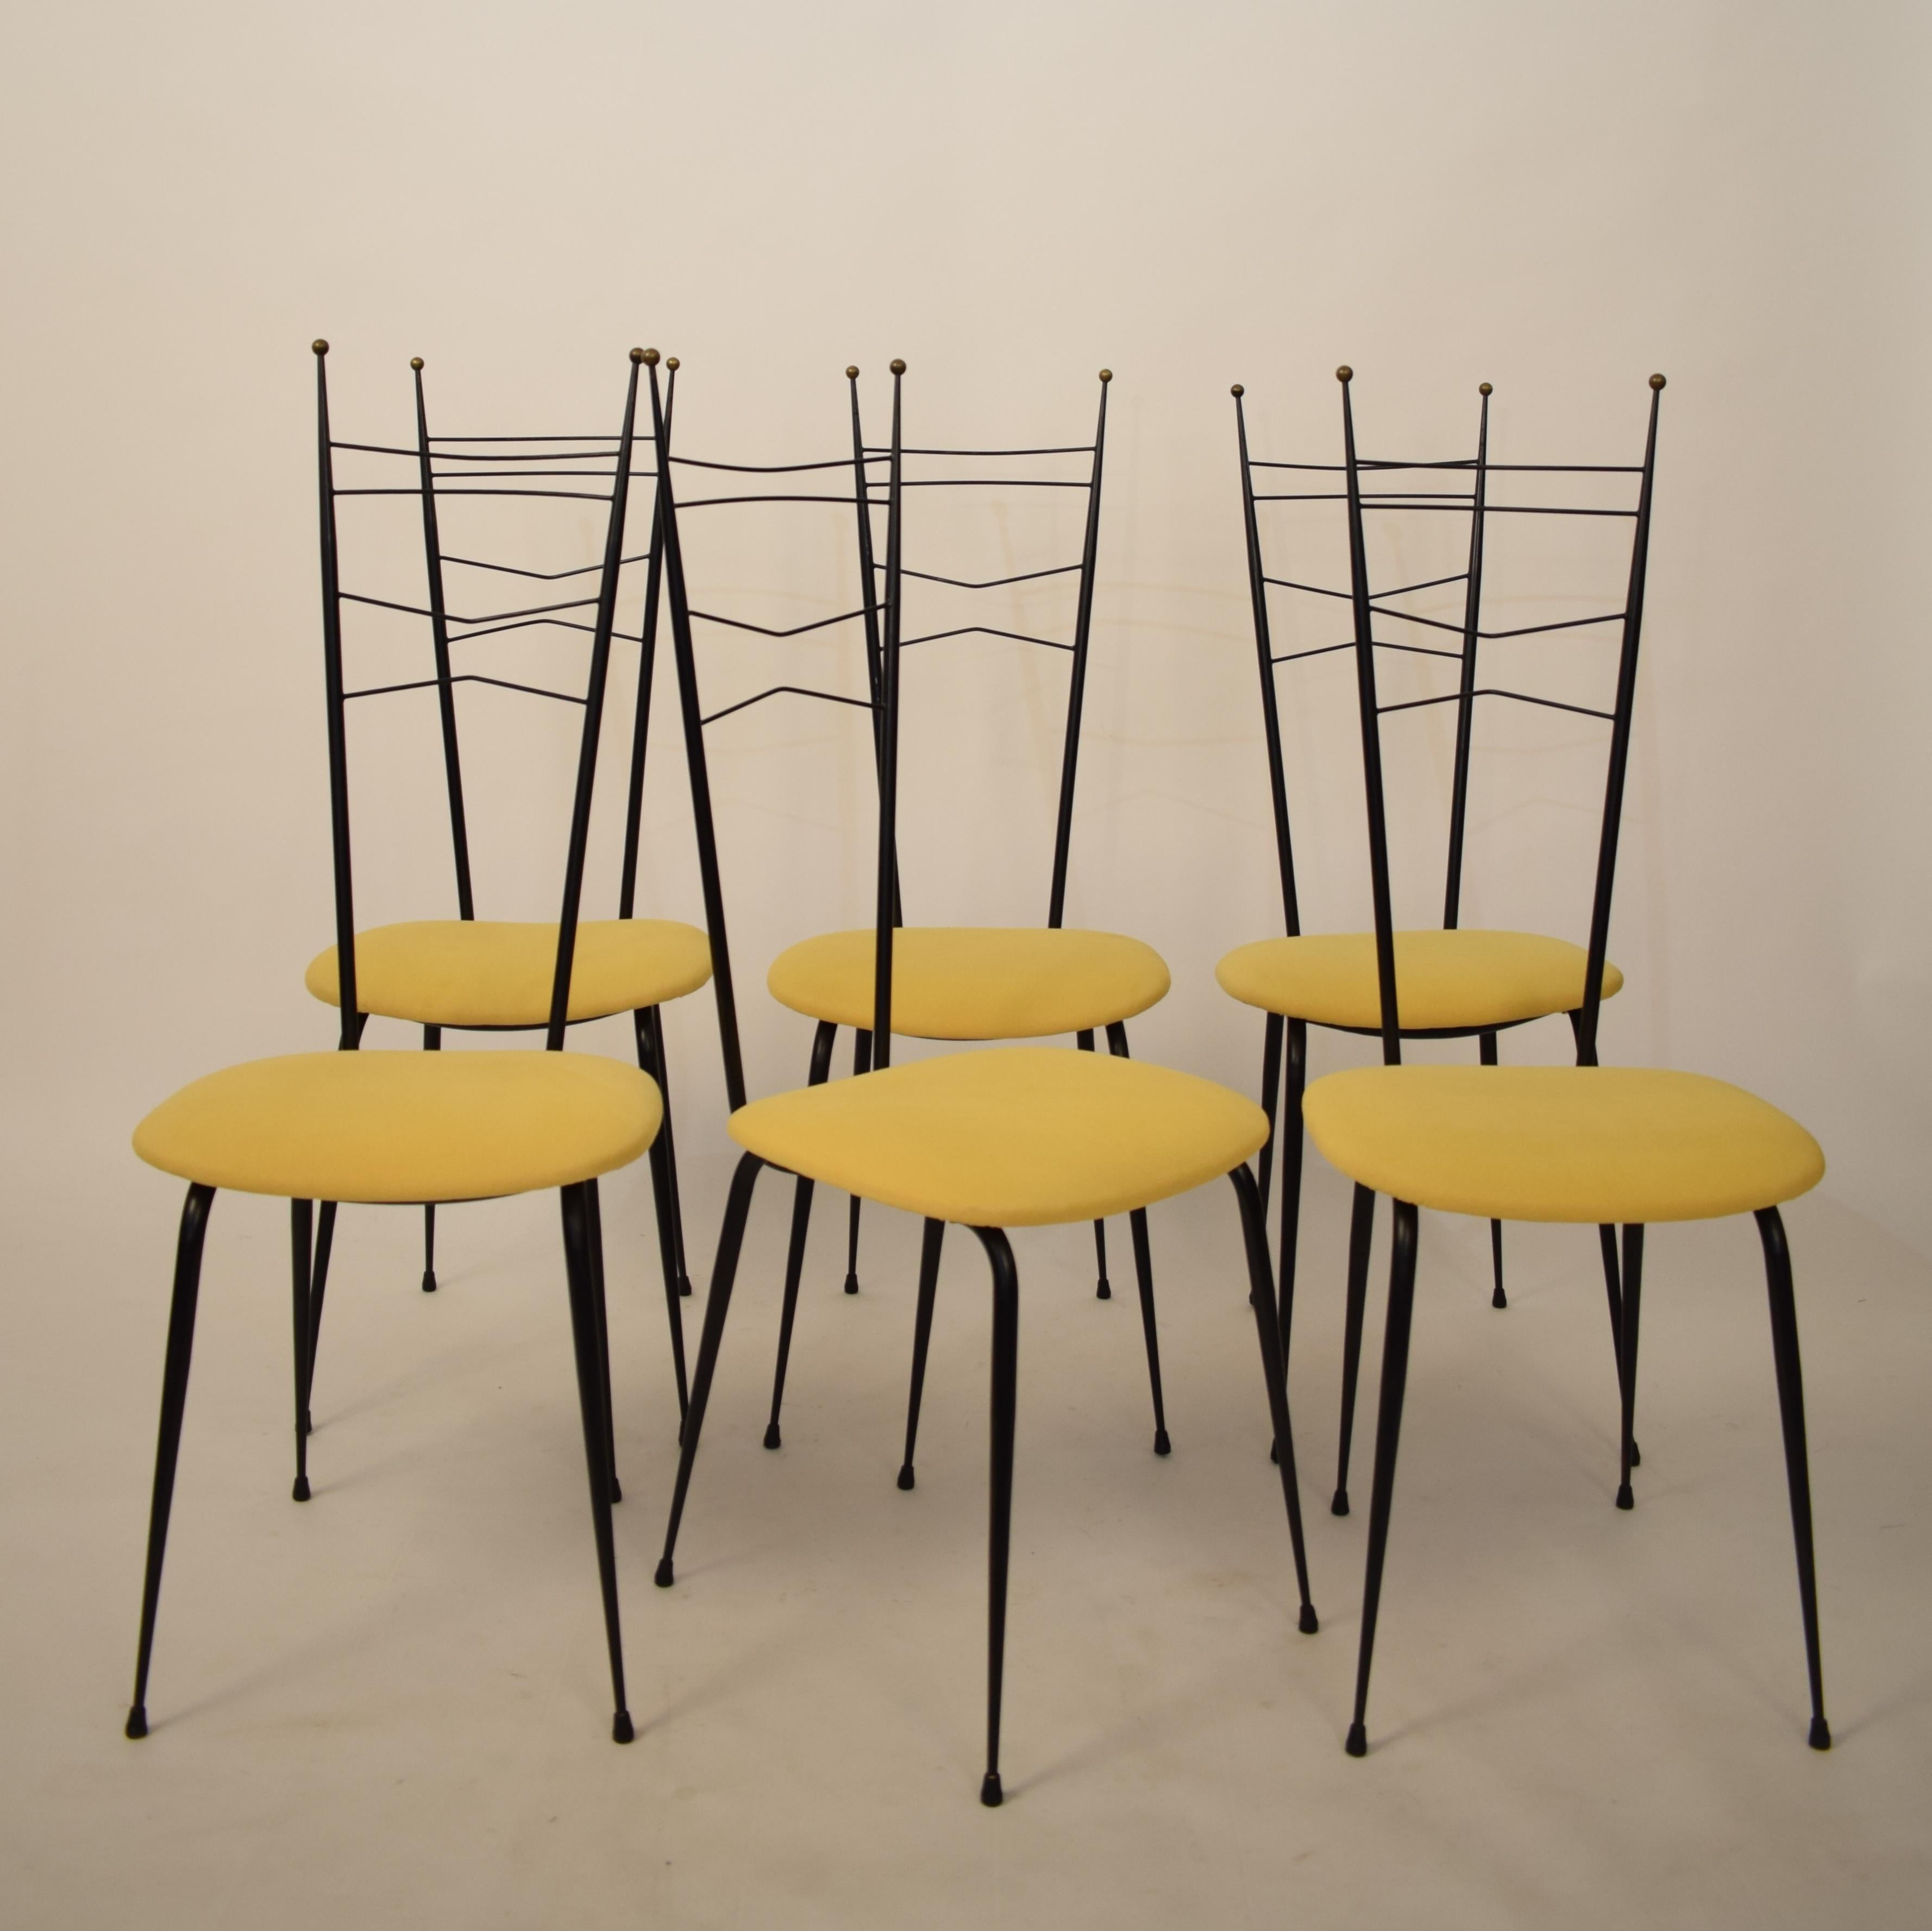 This extraordinary midcentury Italian multi-color dining room set attributed to Ico Parisi and Paolo di Poli.
It is made out of black lacquered metal, Formica, brass and enameled copper.
It is in beautiful untouched original condition and I bought